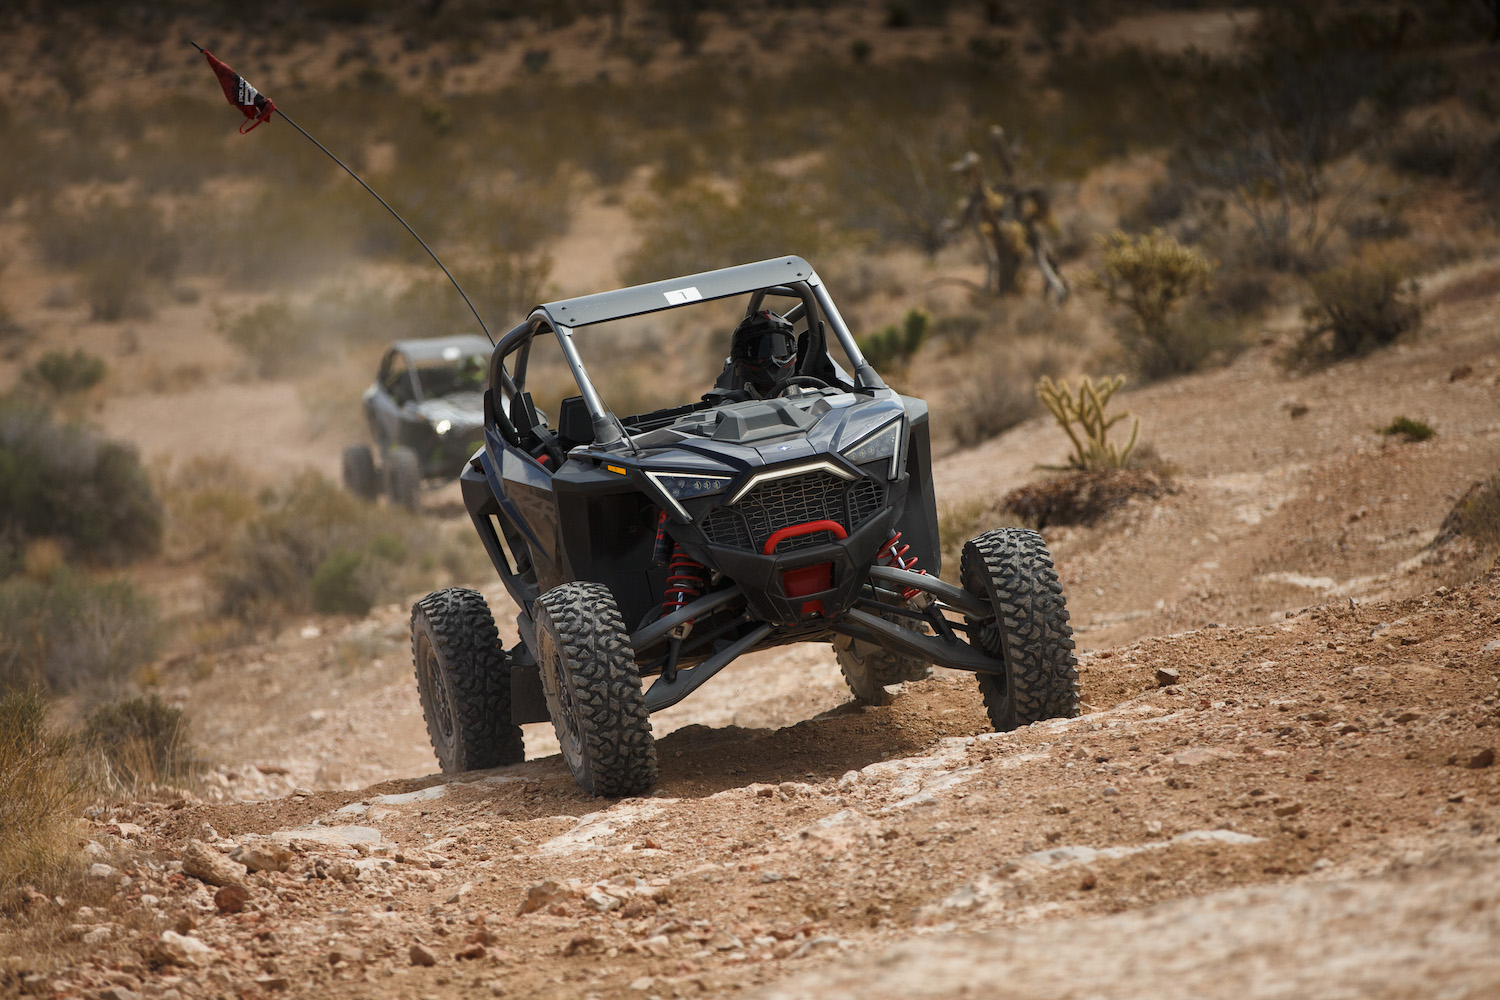 Close up of Polaris RZR Pro R front end on a dirt trail going up a hill in the desert.